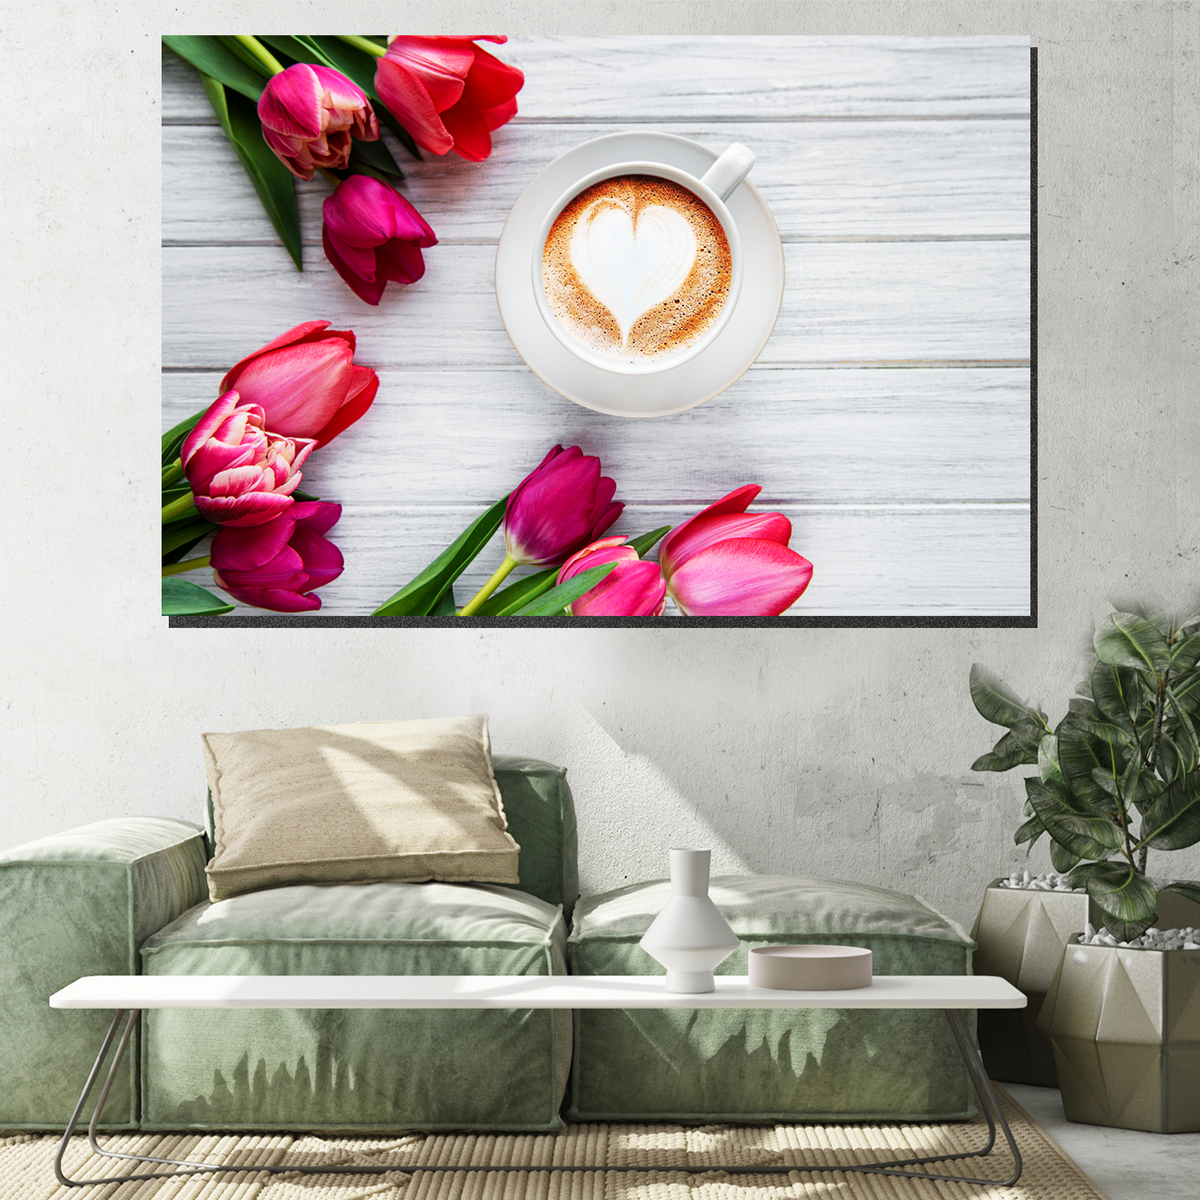 https://cdn.shopify.com/s/files/1/0387/9986/8044/products/CoffeeandTulipsCanvasArtprintStretched-3.png